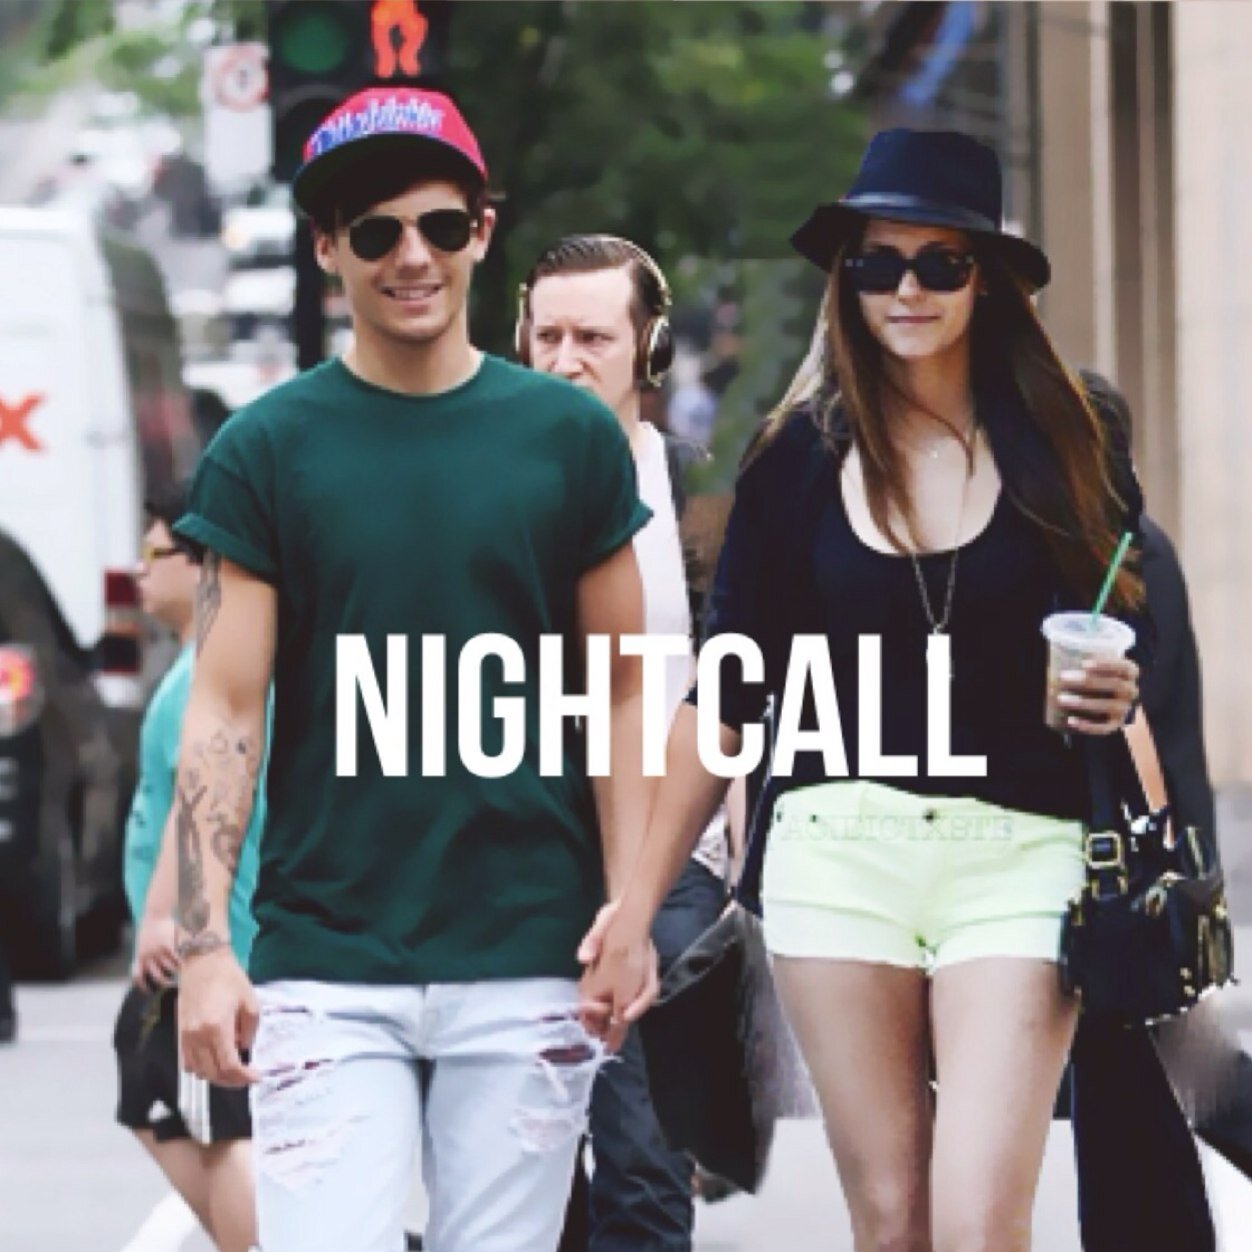 This is the official Nightcall Twitter page :)